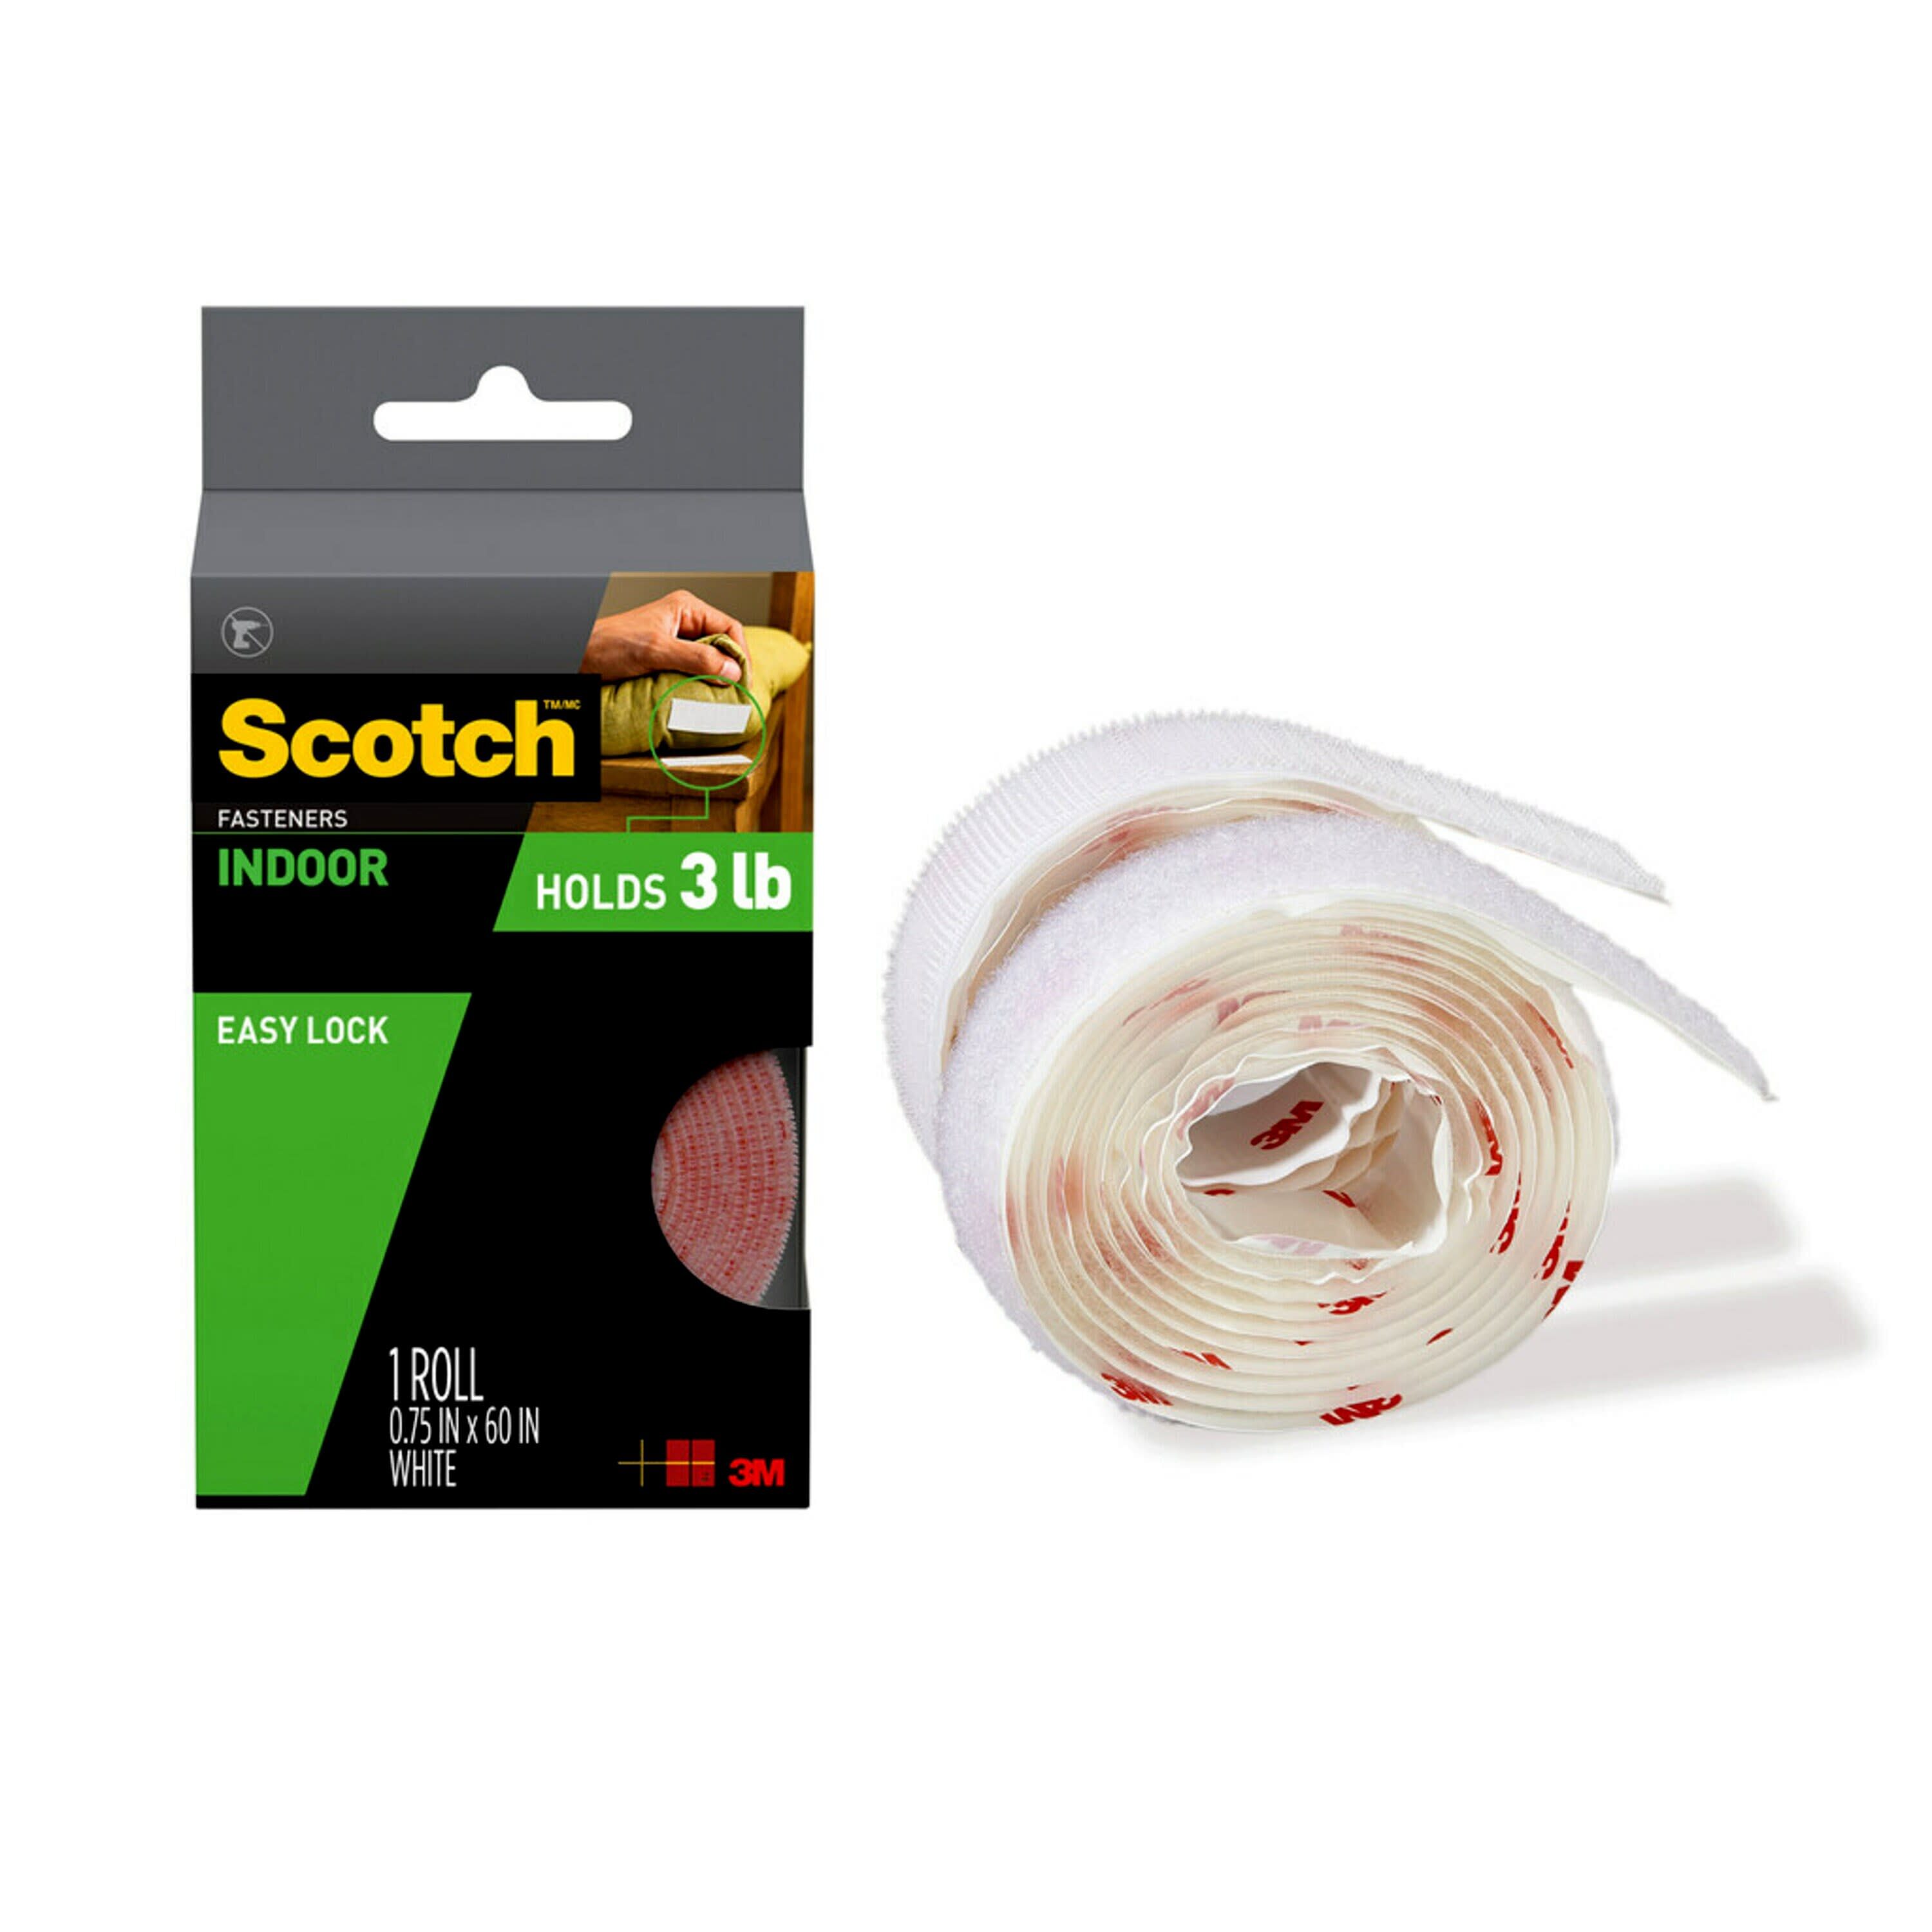 Scotch-Mount Extreme Double-Sided Mounting Strips 8-Pack 1-in-ft